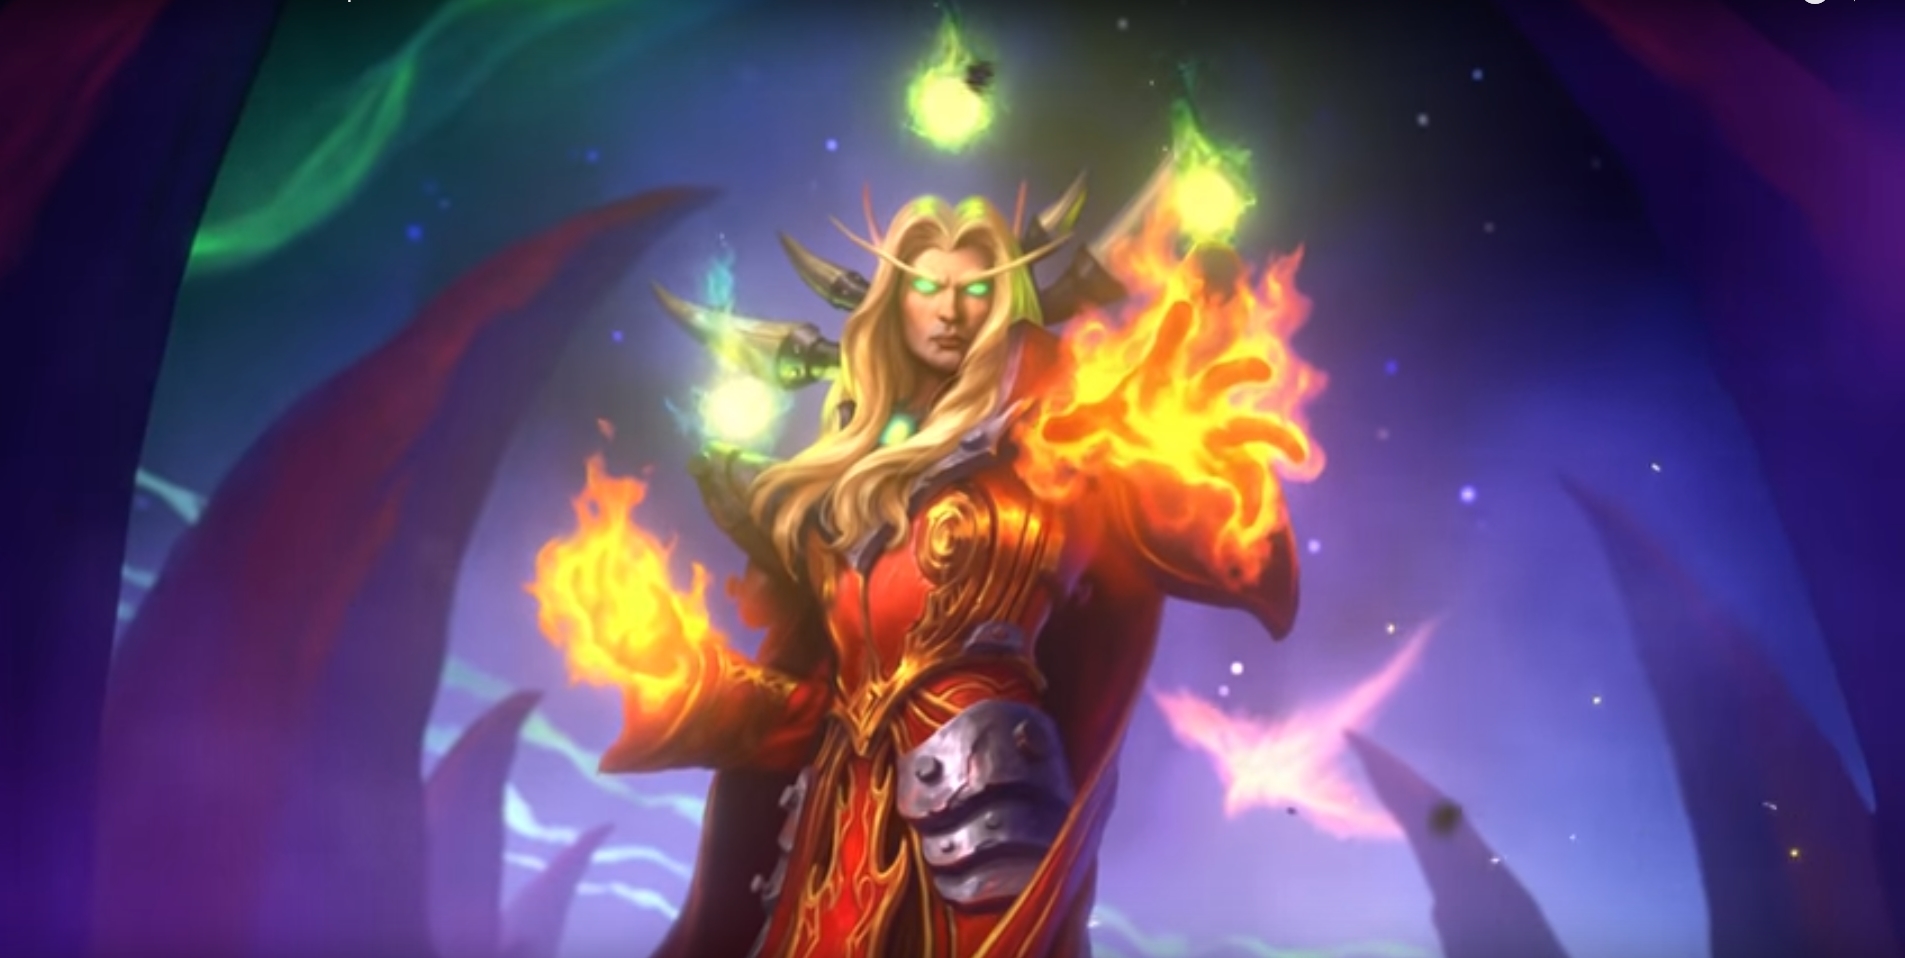 Blizzard Announces Upcoming Ashes Of Outland Hearthstone Expansion, Including New Demon Hunter Class